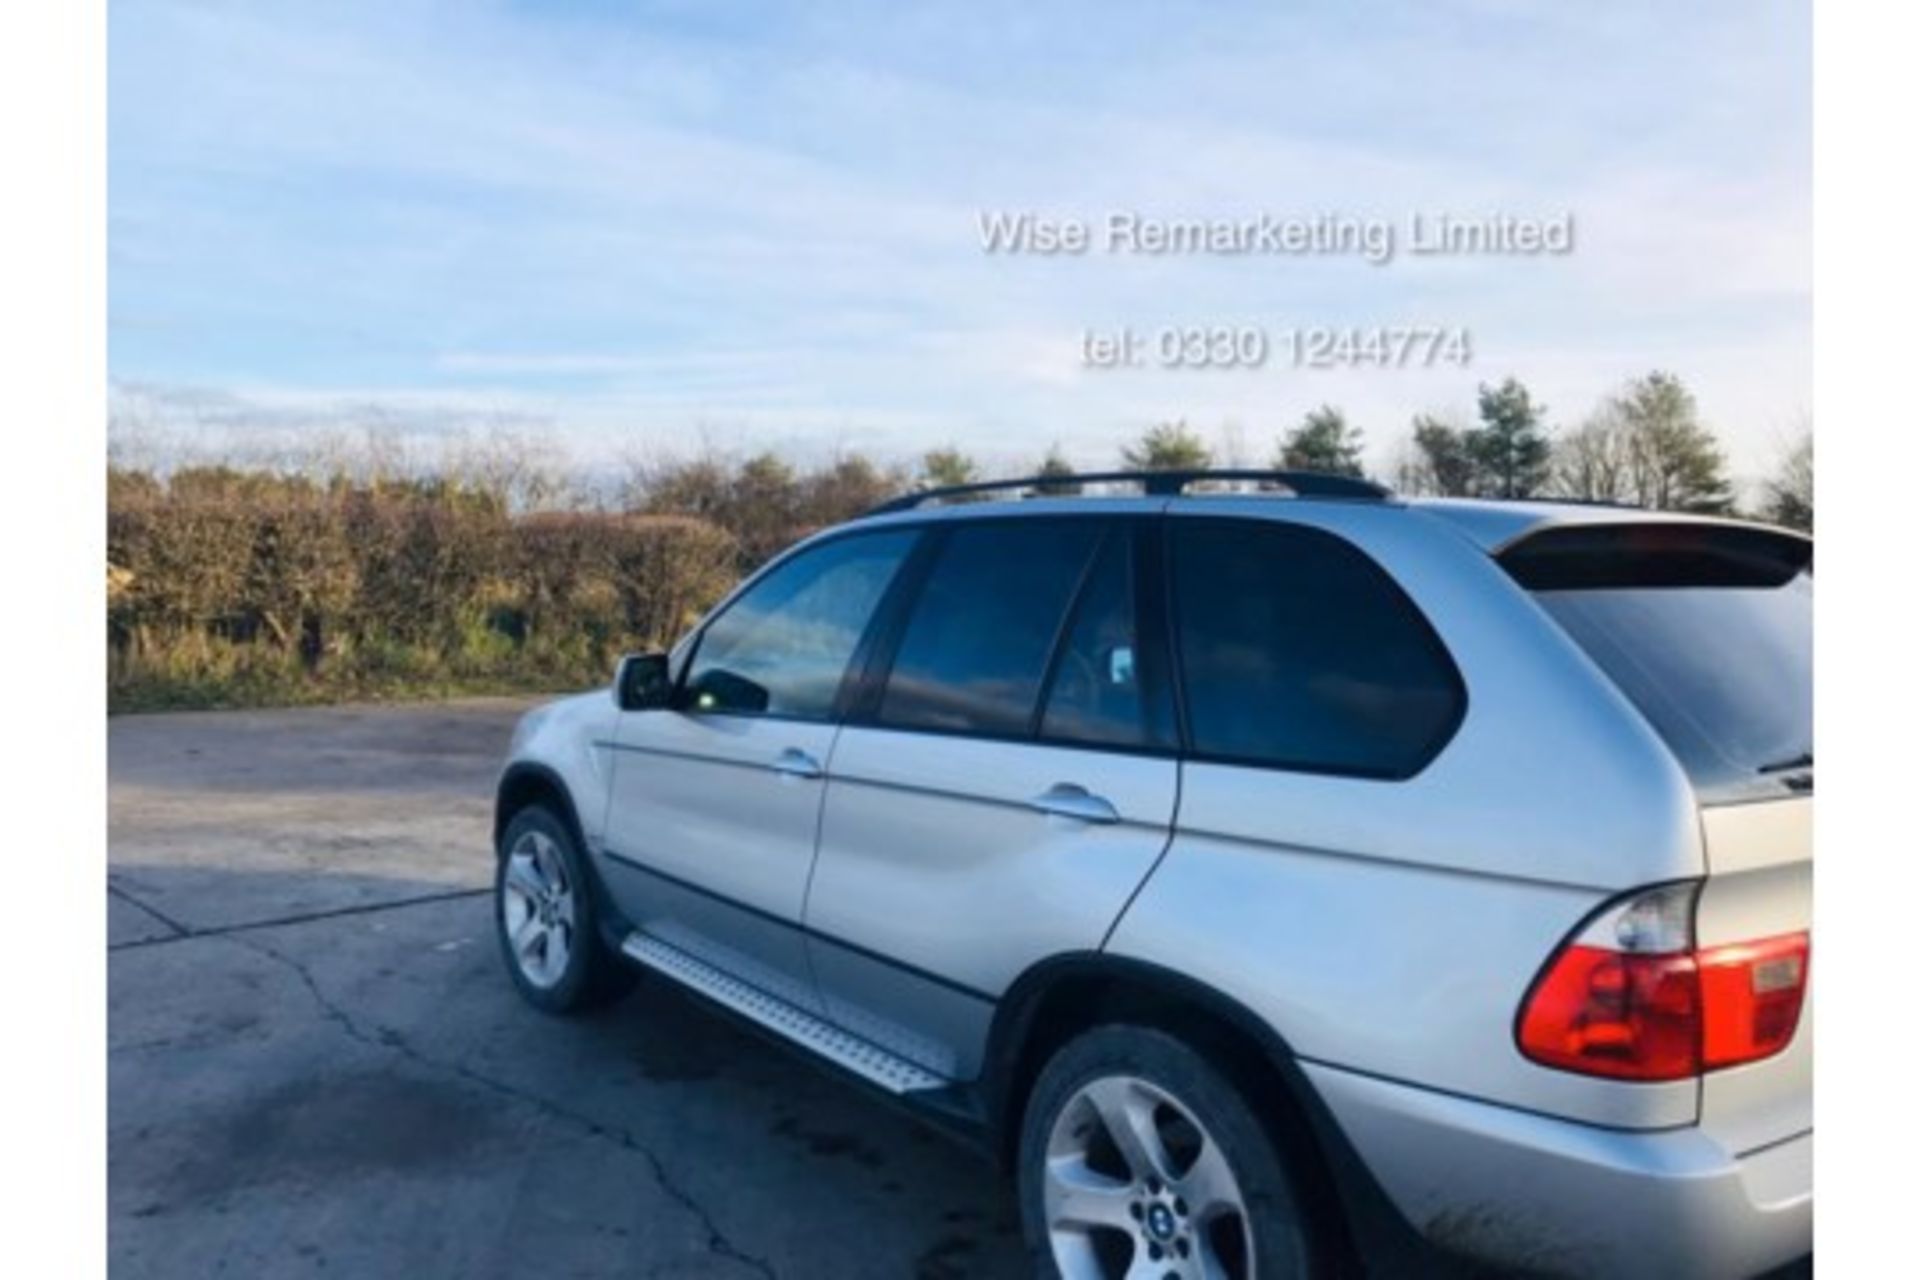 BMW X5 Sport 3.0d Auto - 2006 Model - Full Leather - Heated Seats - Fully Loaded - Image 3 of 20